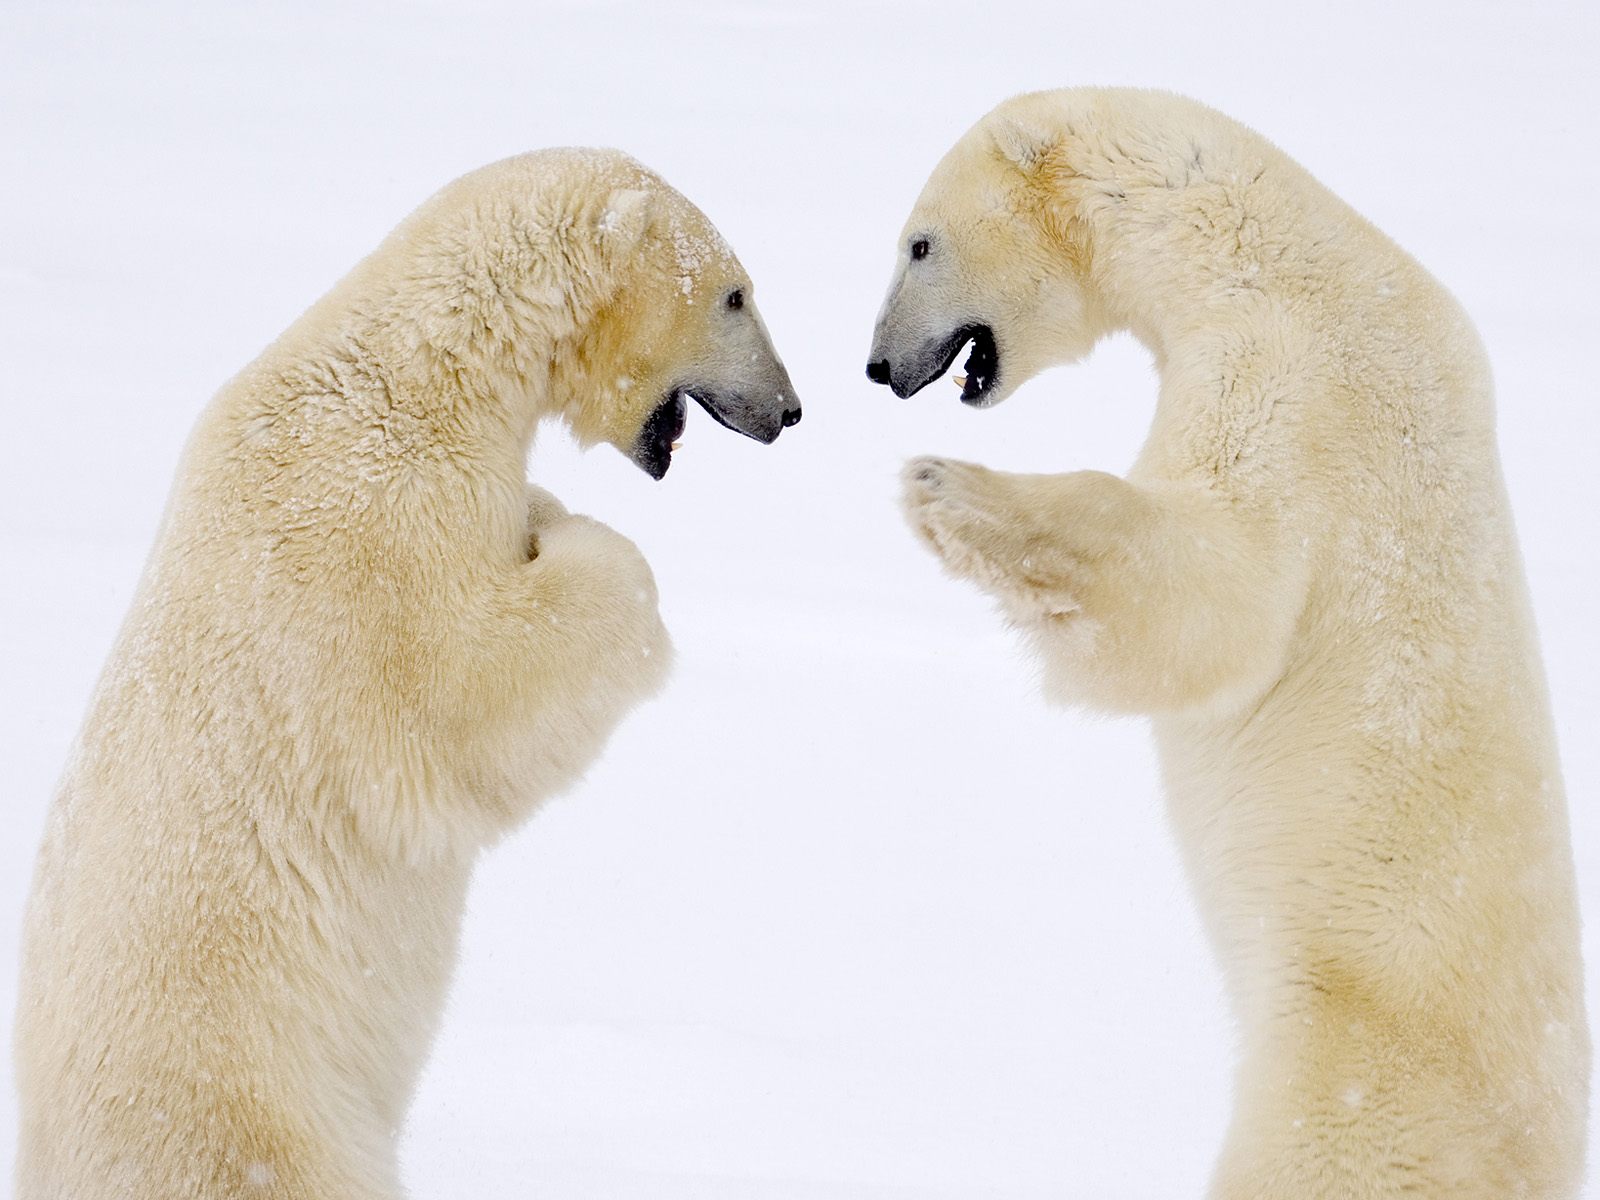 Male Bears Sparring Canada1578459 - Male Bears Sparring Canada - Sparring, Penguins, Male, Canada, Bears